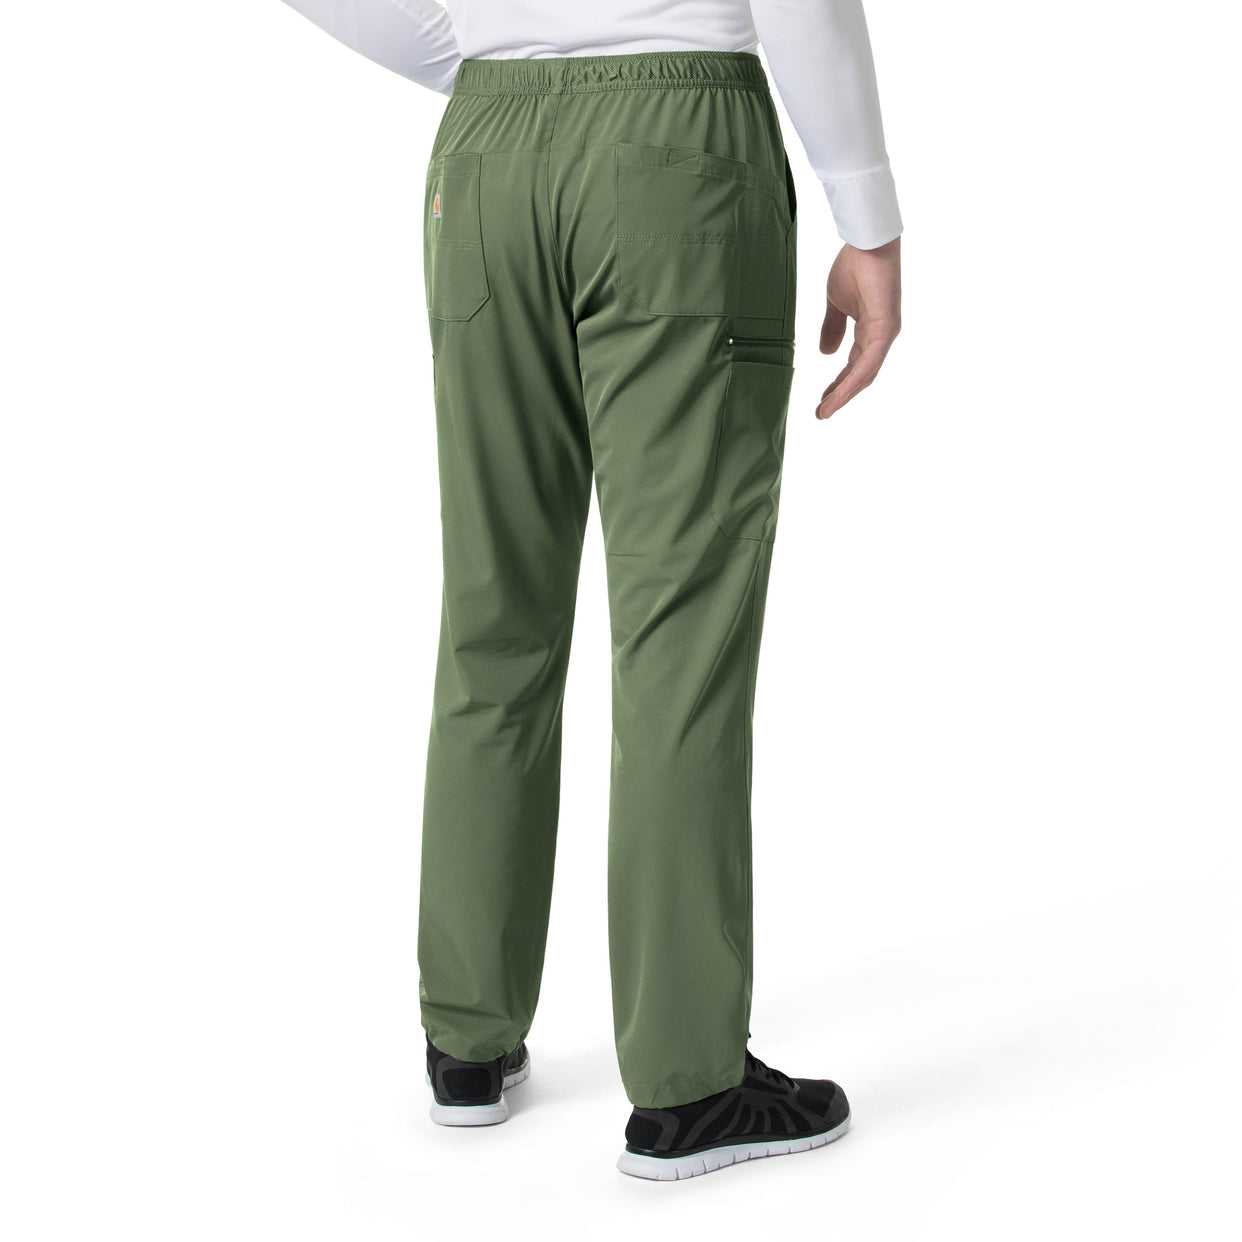 Force Liberty Men's Athletic Cargo Scrub Pant Olive back view